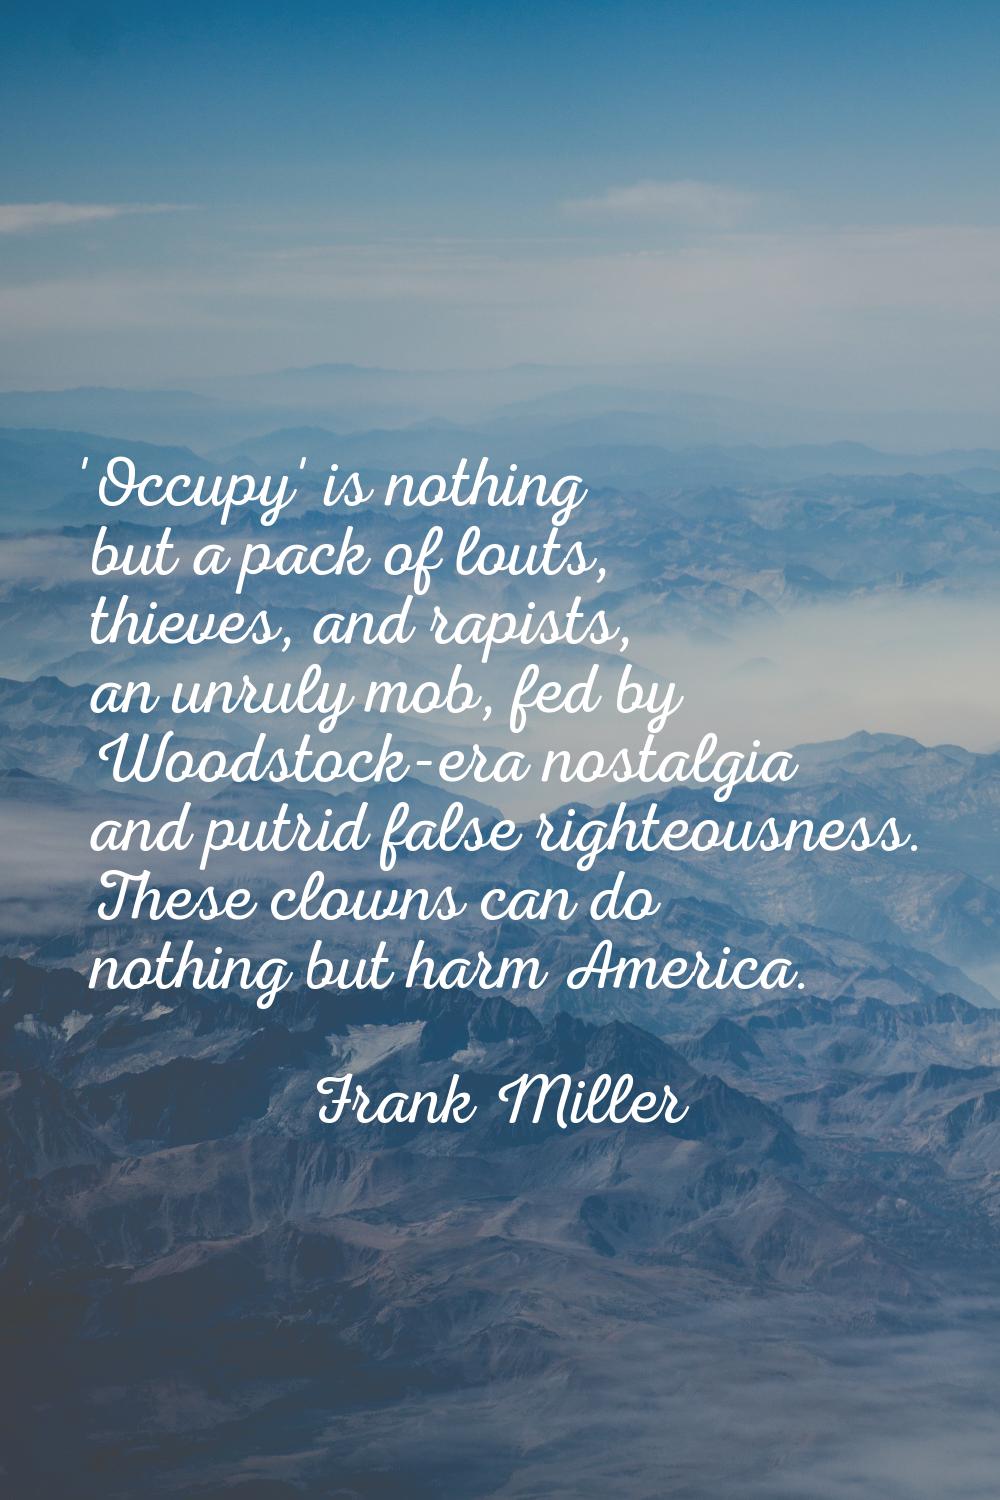 'Occupy' is nothing but a pack of louts, thieves, and rapists, an unruly mob, fed by Woodstock-era 